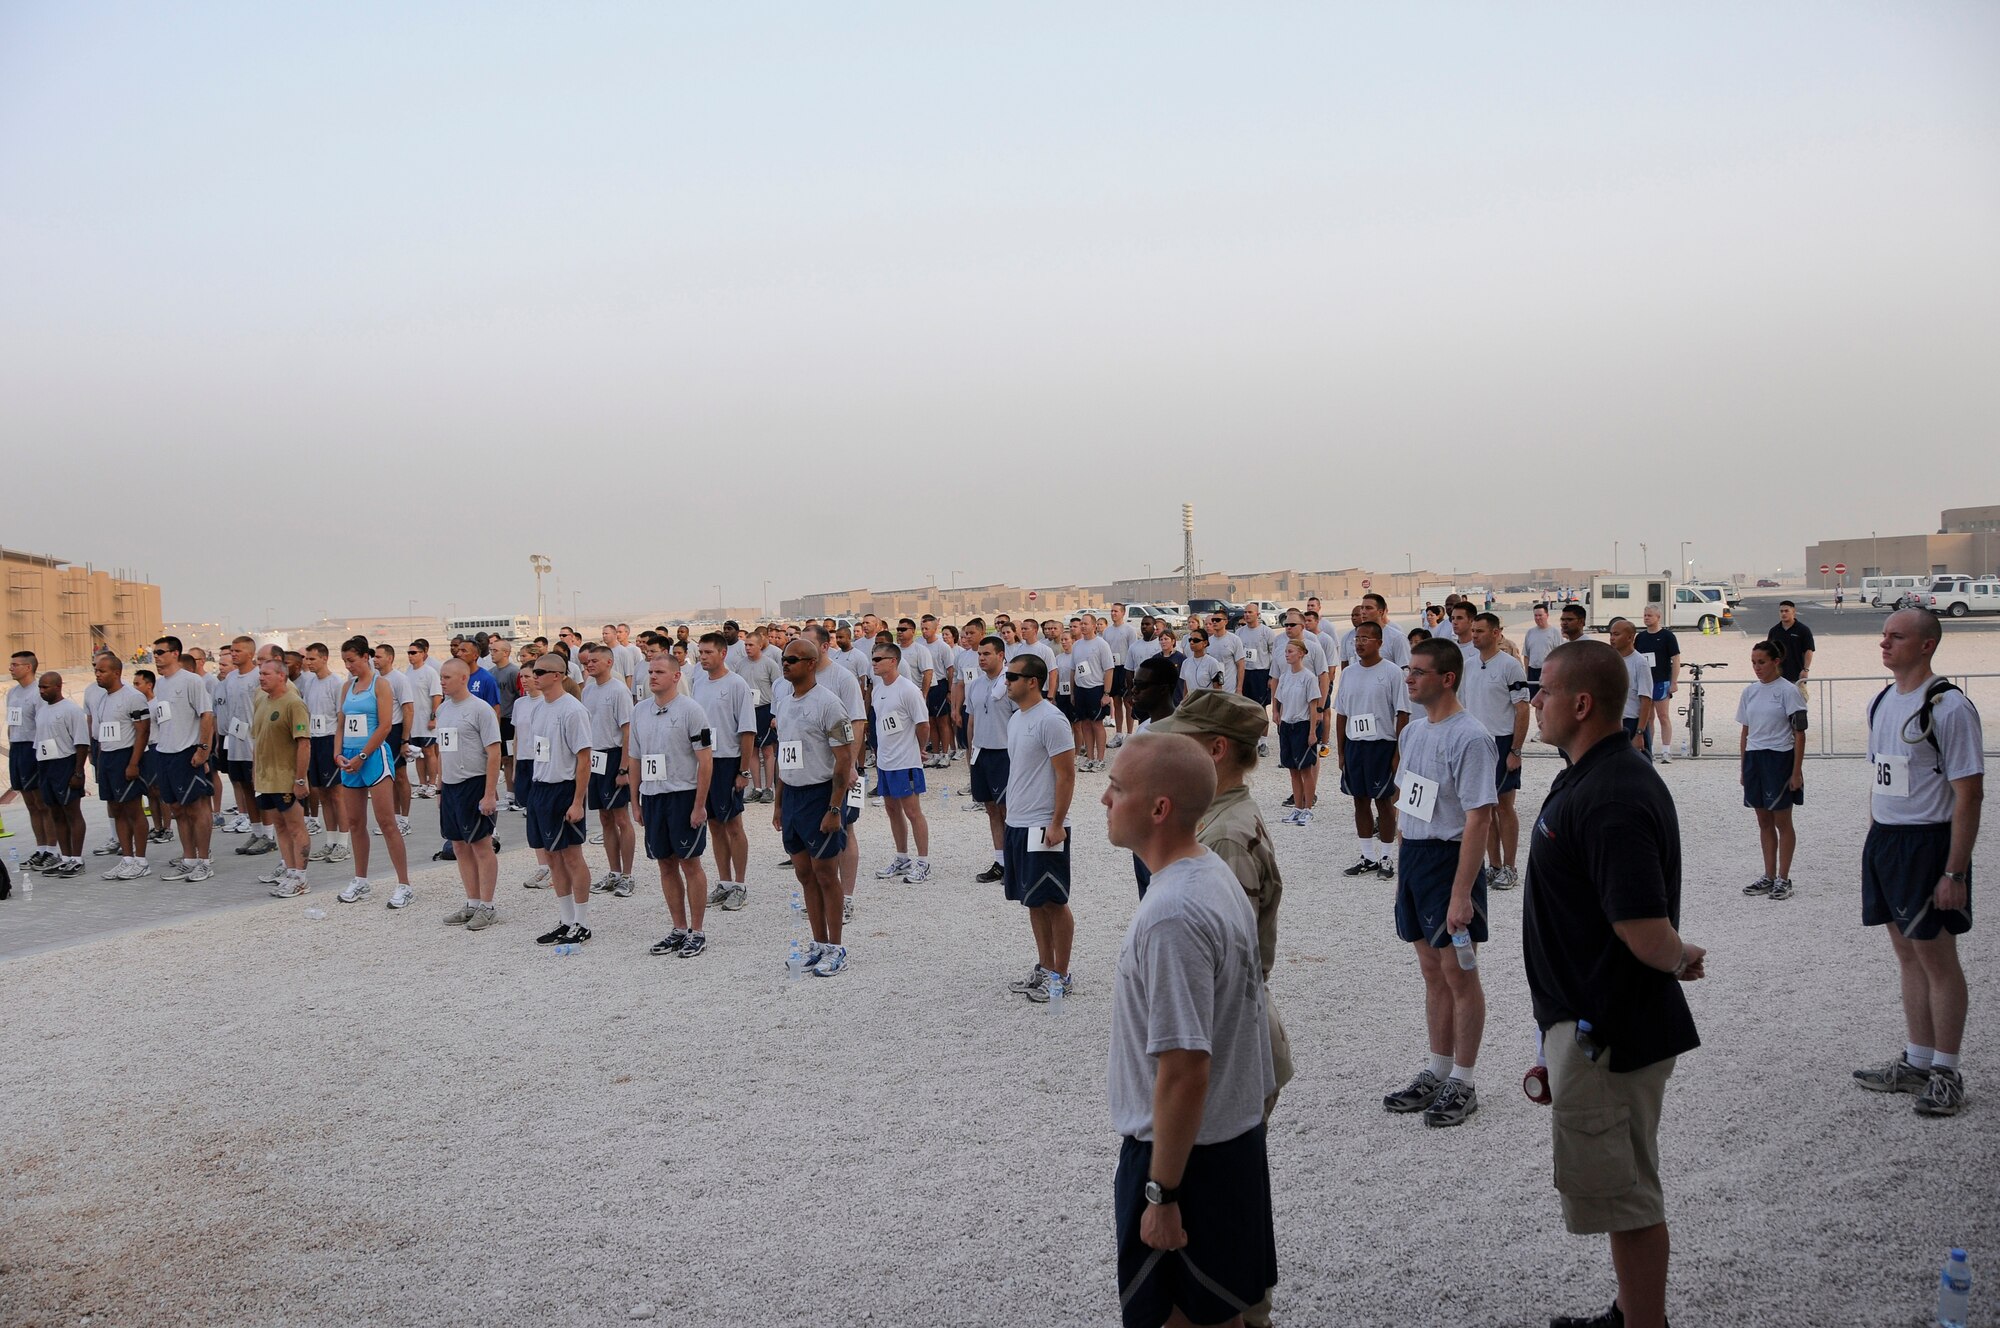 Runners pay respects during the playing of taps prior to the “Run for the Fallen 5K” sponsored by the 379th Expeditionary Force Support Squadron Sunday, Aug. 17, 2008, at an undisclosed air base in Southwest Asia.  183 runners from the Army, Navy, Air Force and Marines as well as coalition partners participated in the run honoring those who have made the ultimate sacrifice in the Global War on Terrorism. (U.S. Air Force photo by Tech. Sgt. Michael Boquette/Released)